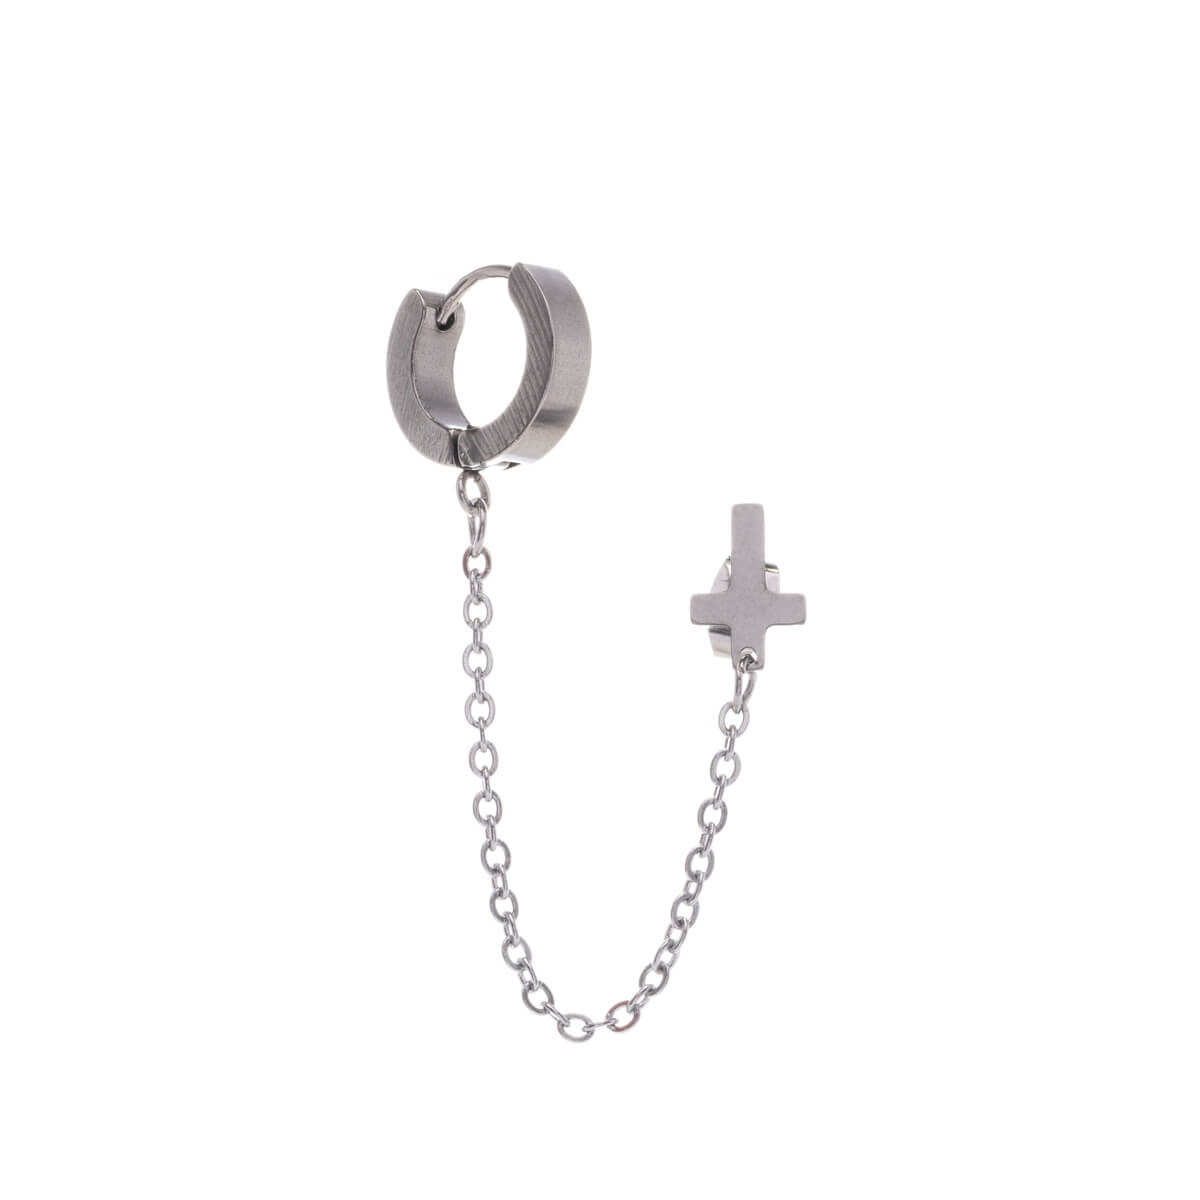 Earring and cross earring with chain 1pc (Steel 316L)